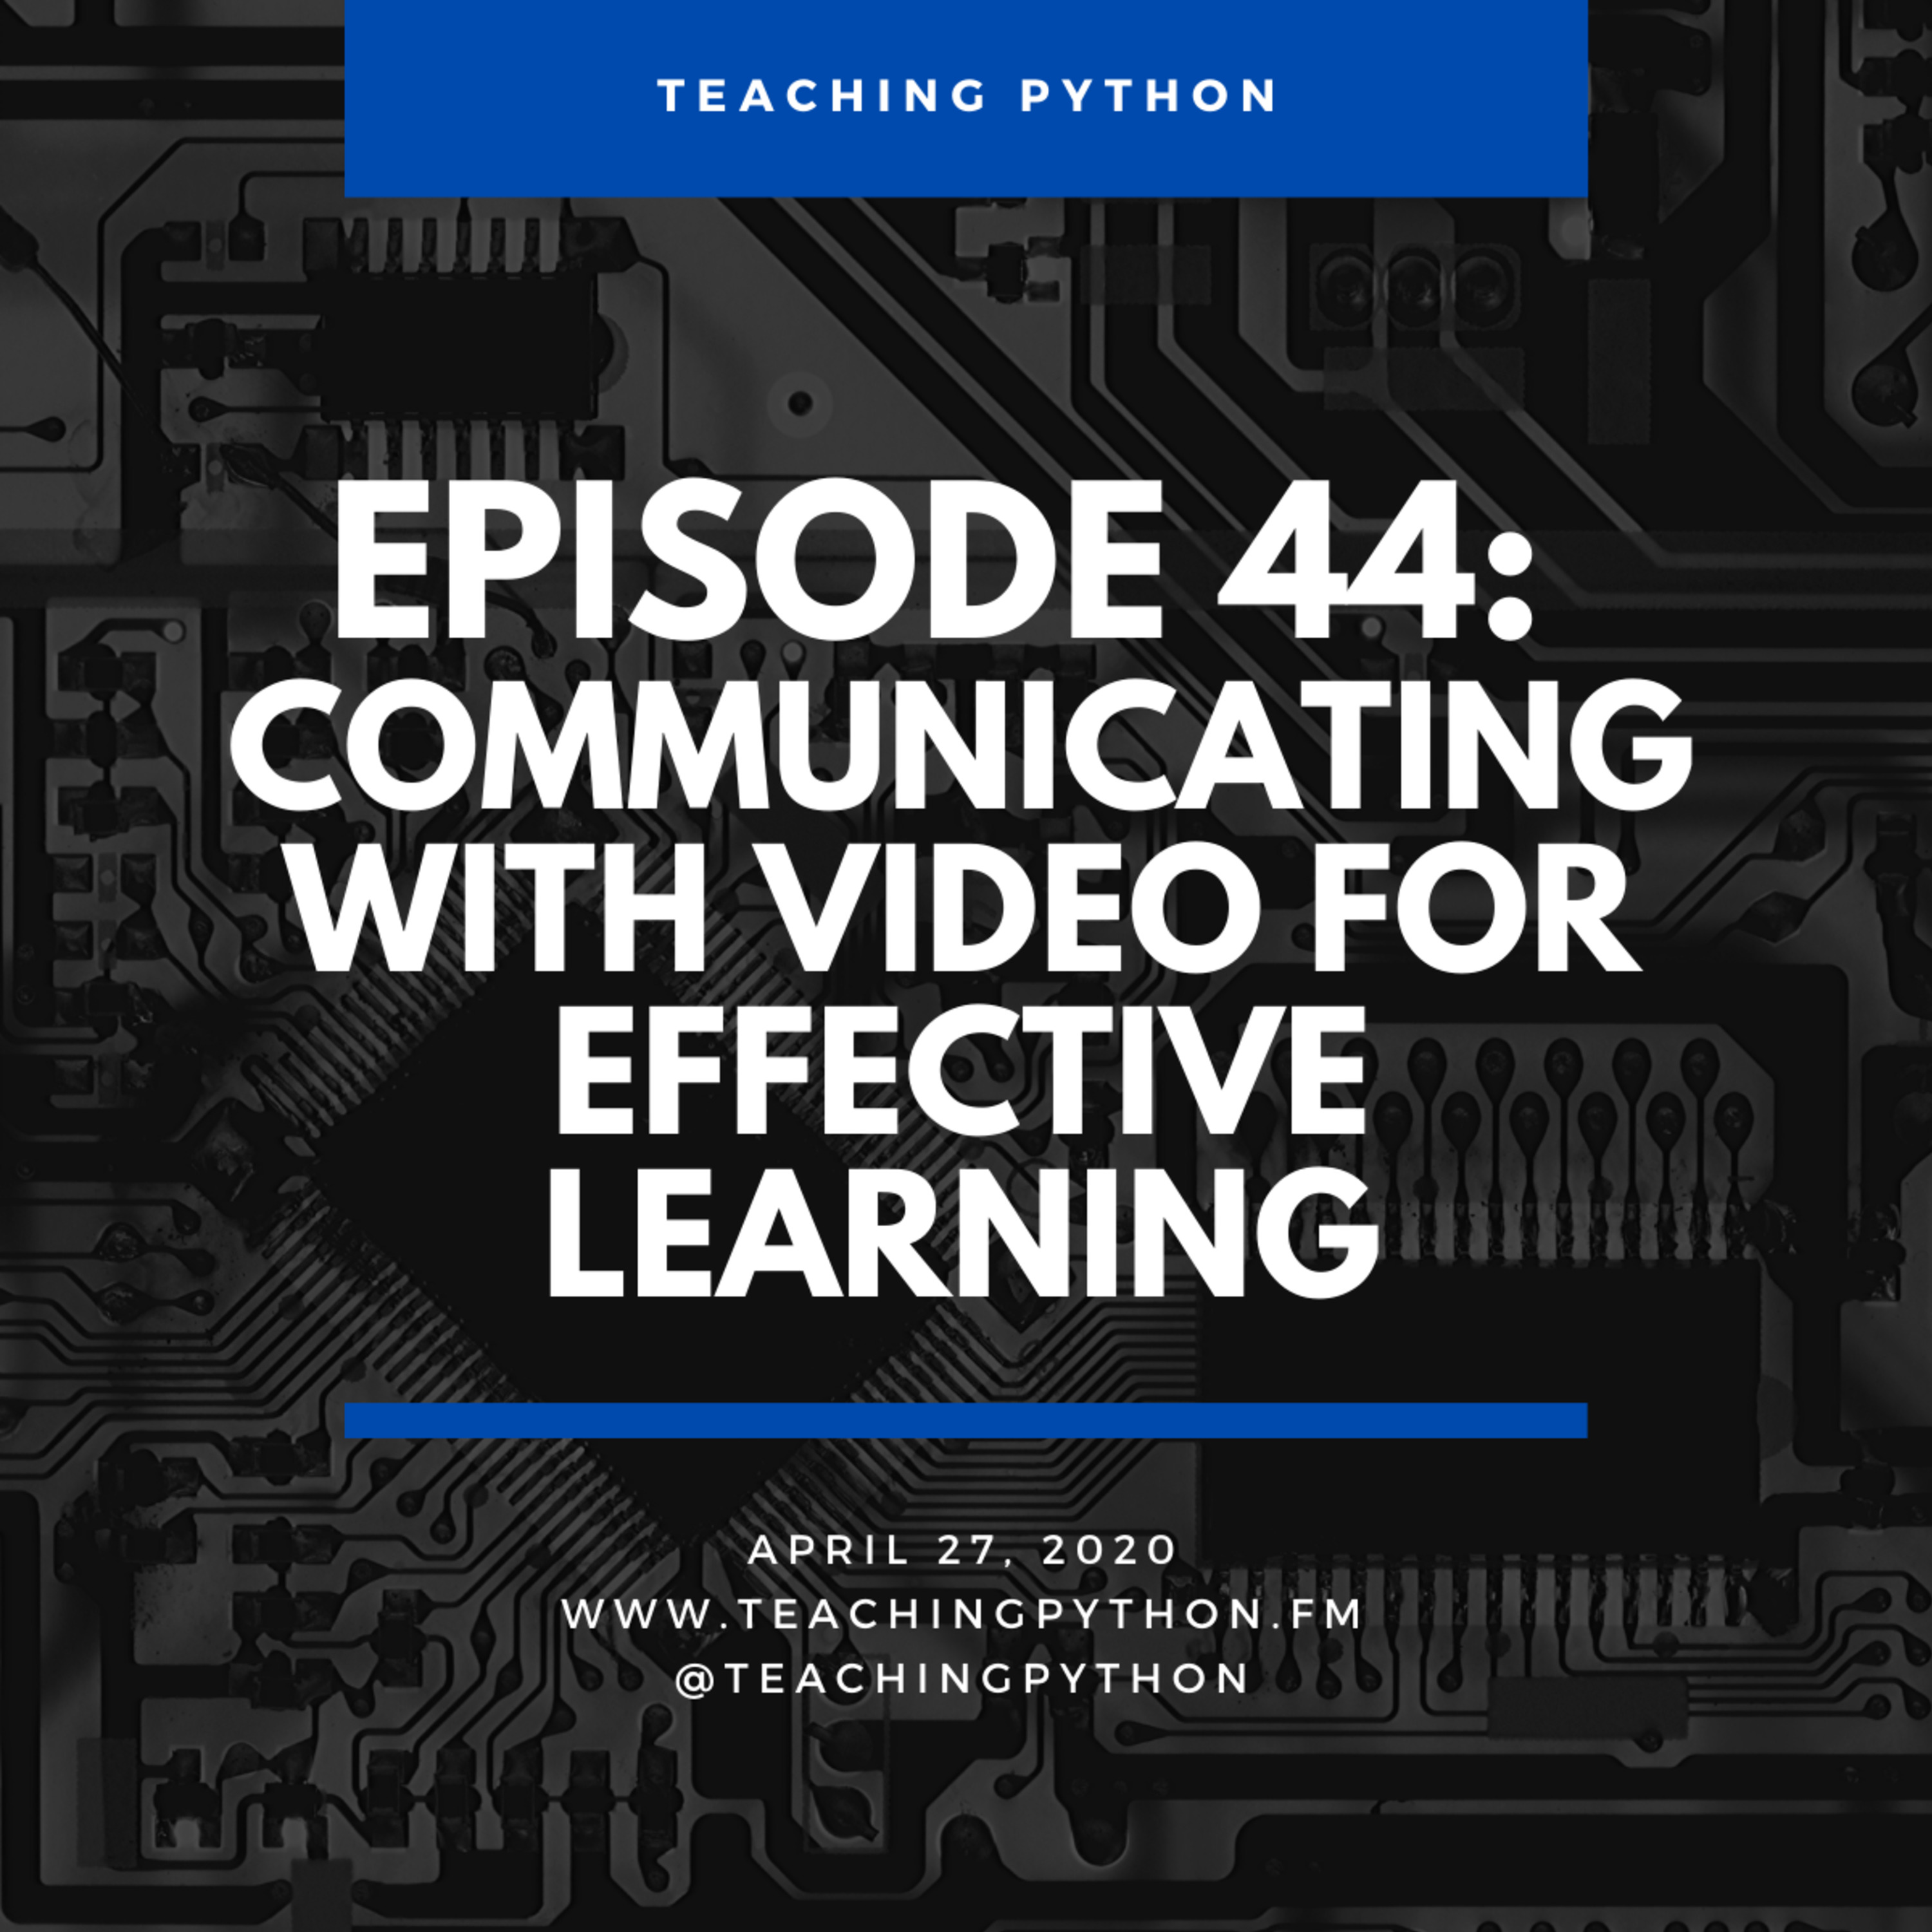 Episode 44: Communicating With Video For Effective Learning